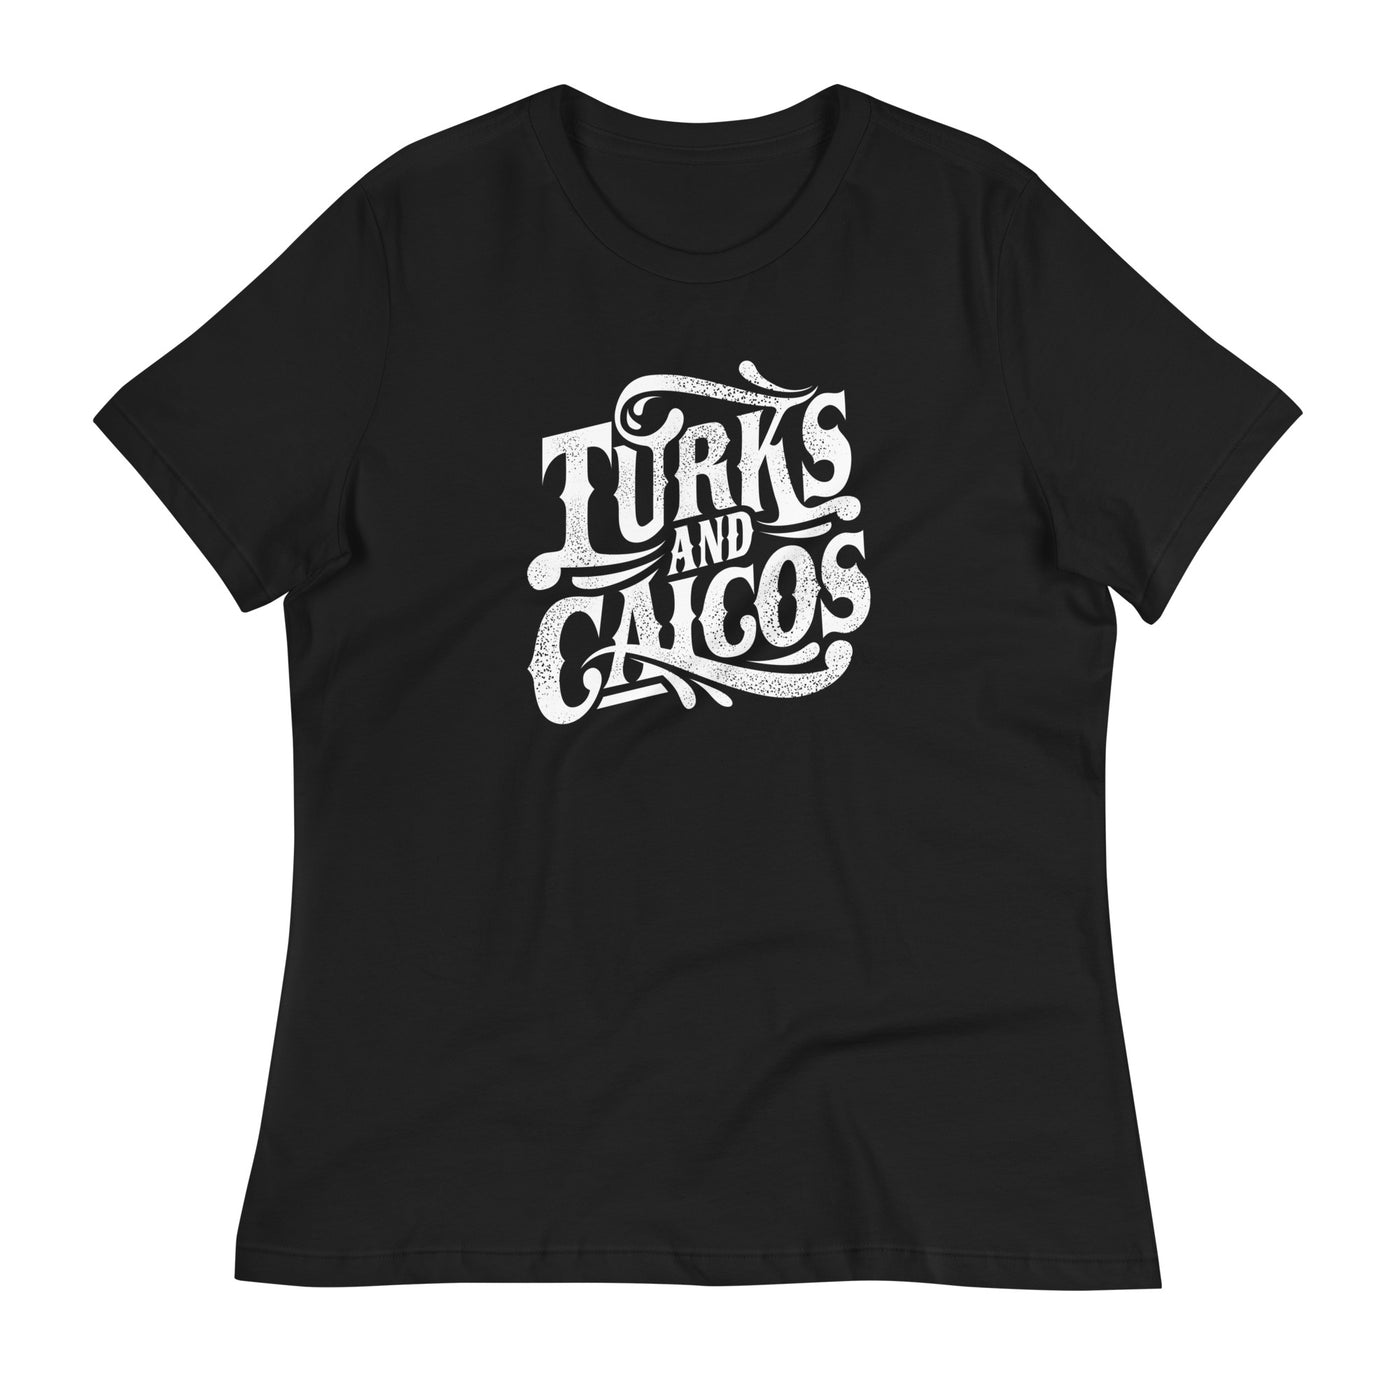 Turks and Caicos Women's T-Shirt